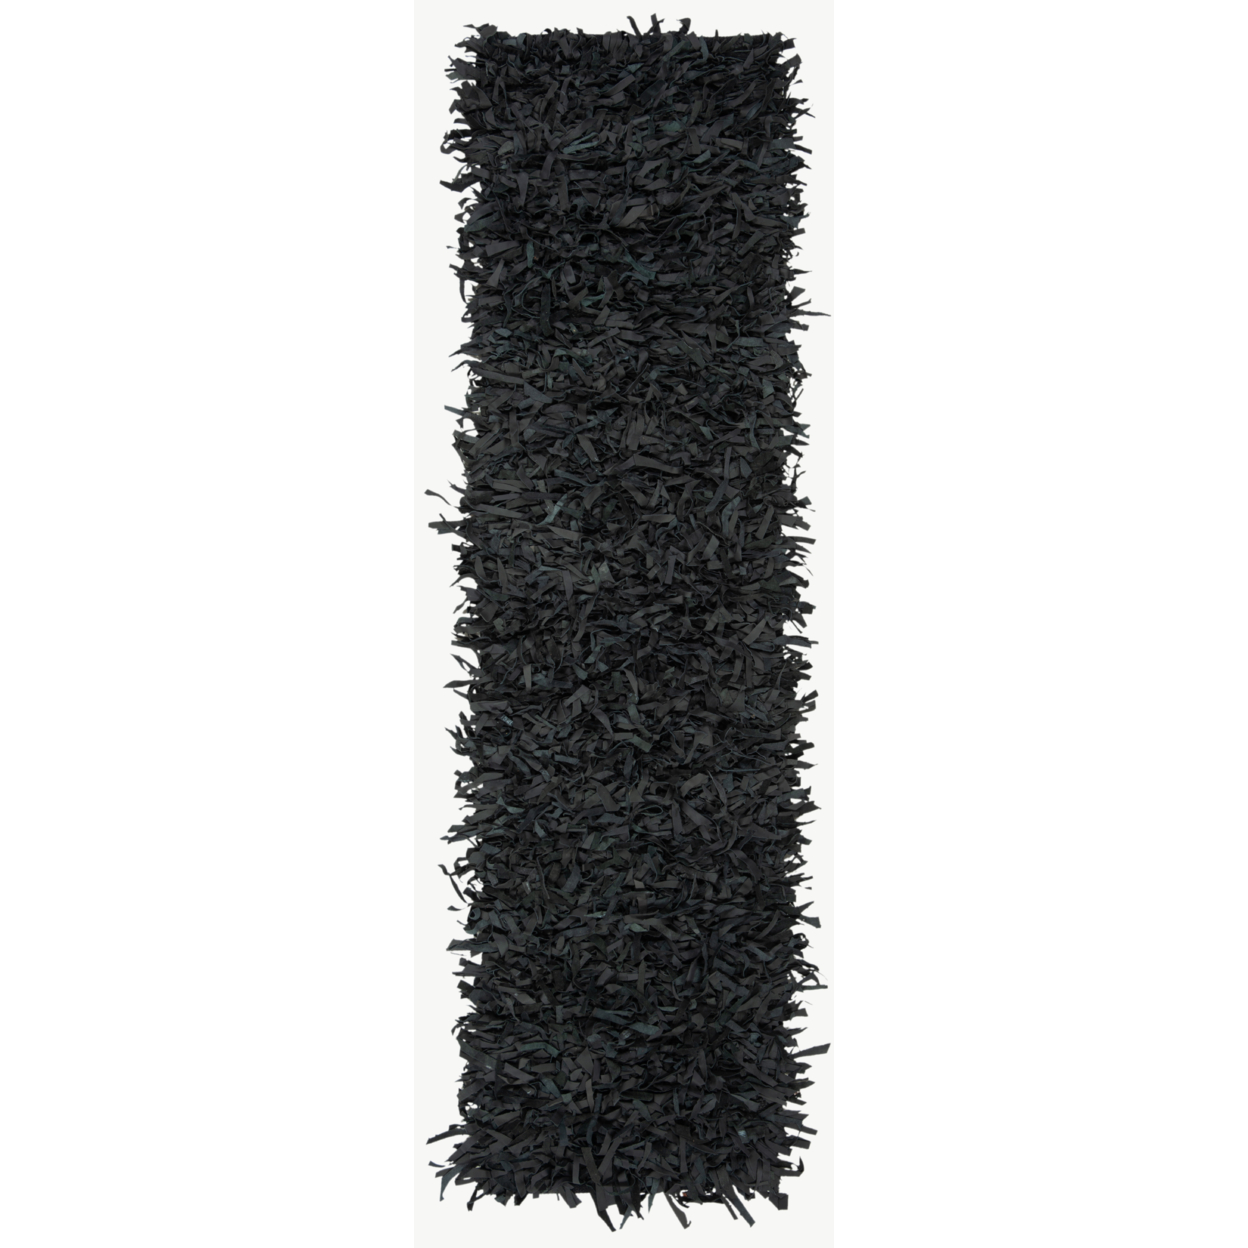 SAFAVIEH Leather Shag LSG601A Hand-knotted Black Rug - 4' X 6'